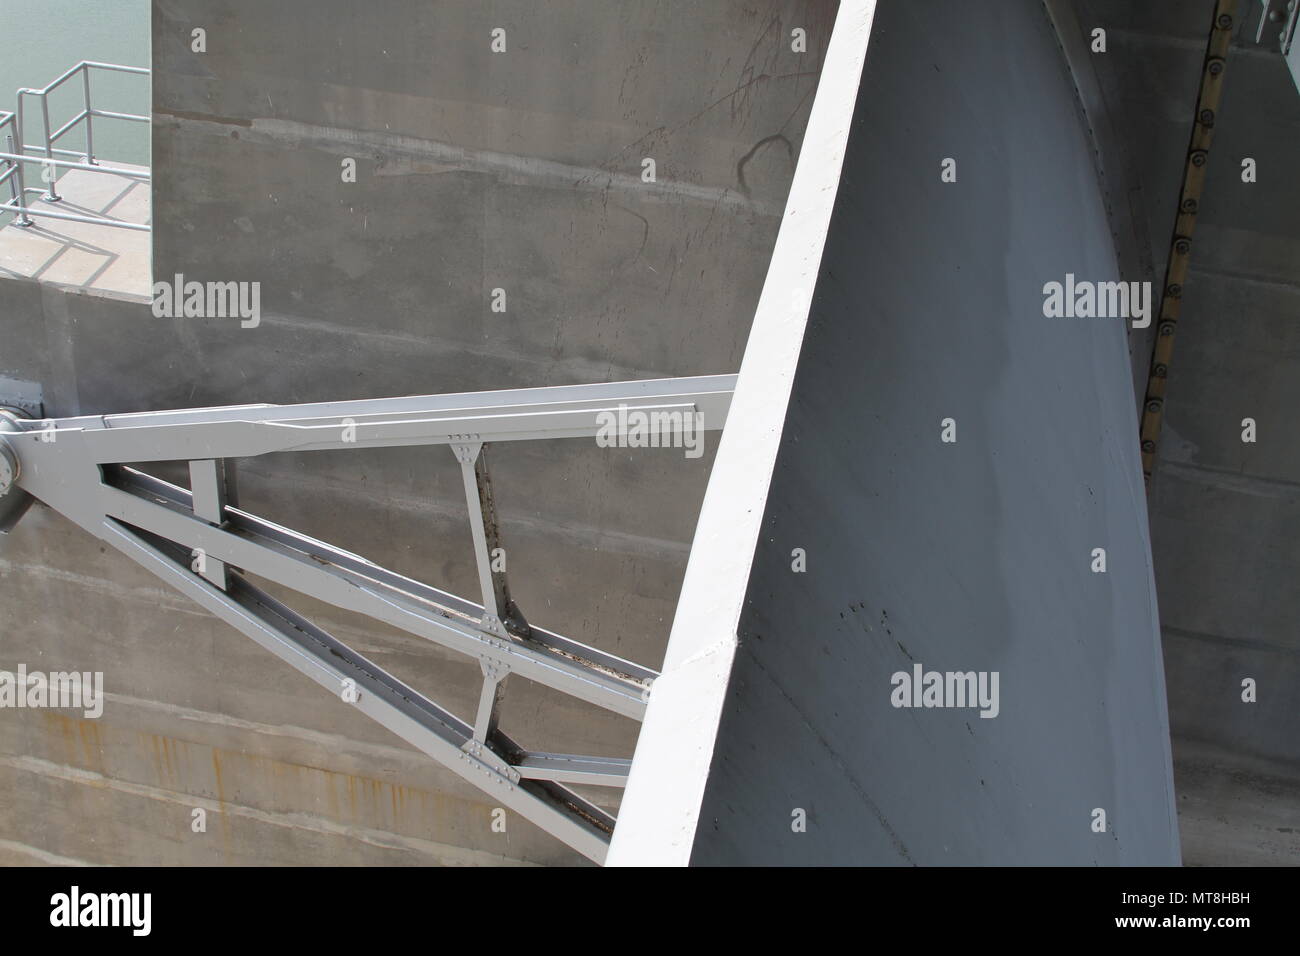 The above view of one of the tainter gates - curved for strength to hold water on the lake side of the dam - which shows the reinforce arms repaired during construction repairs to the Harlan County Dam May 11, 2018. Stock Photo